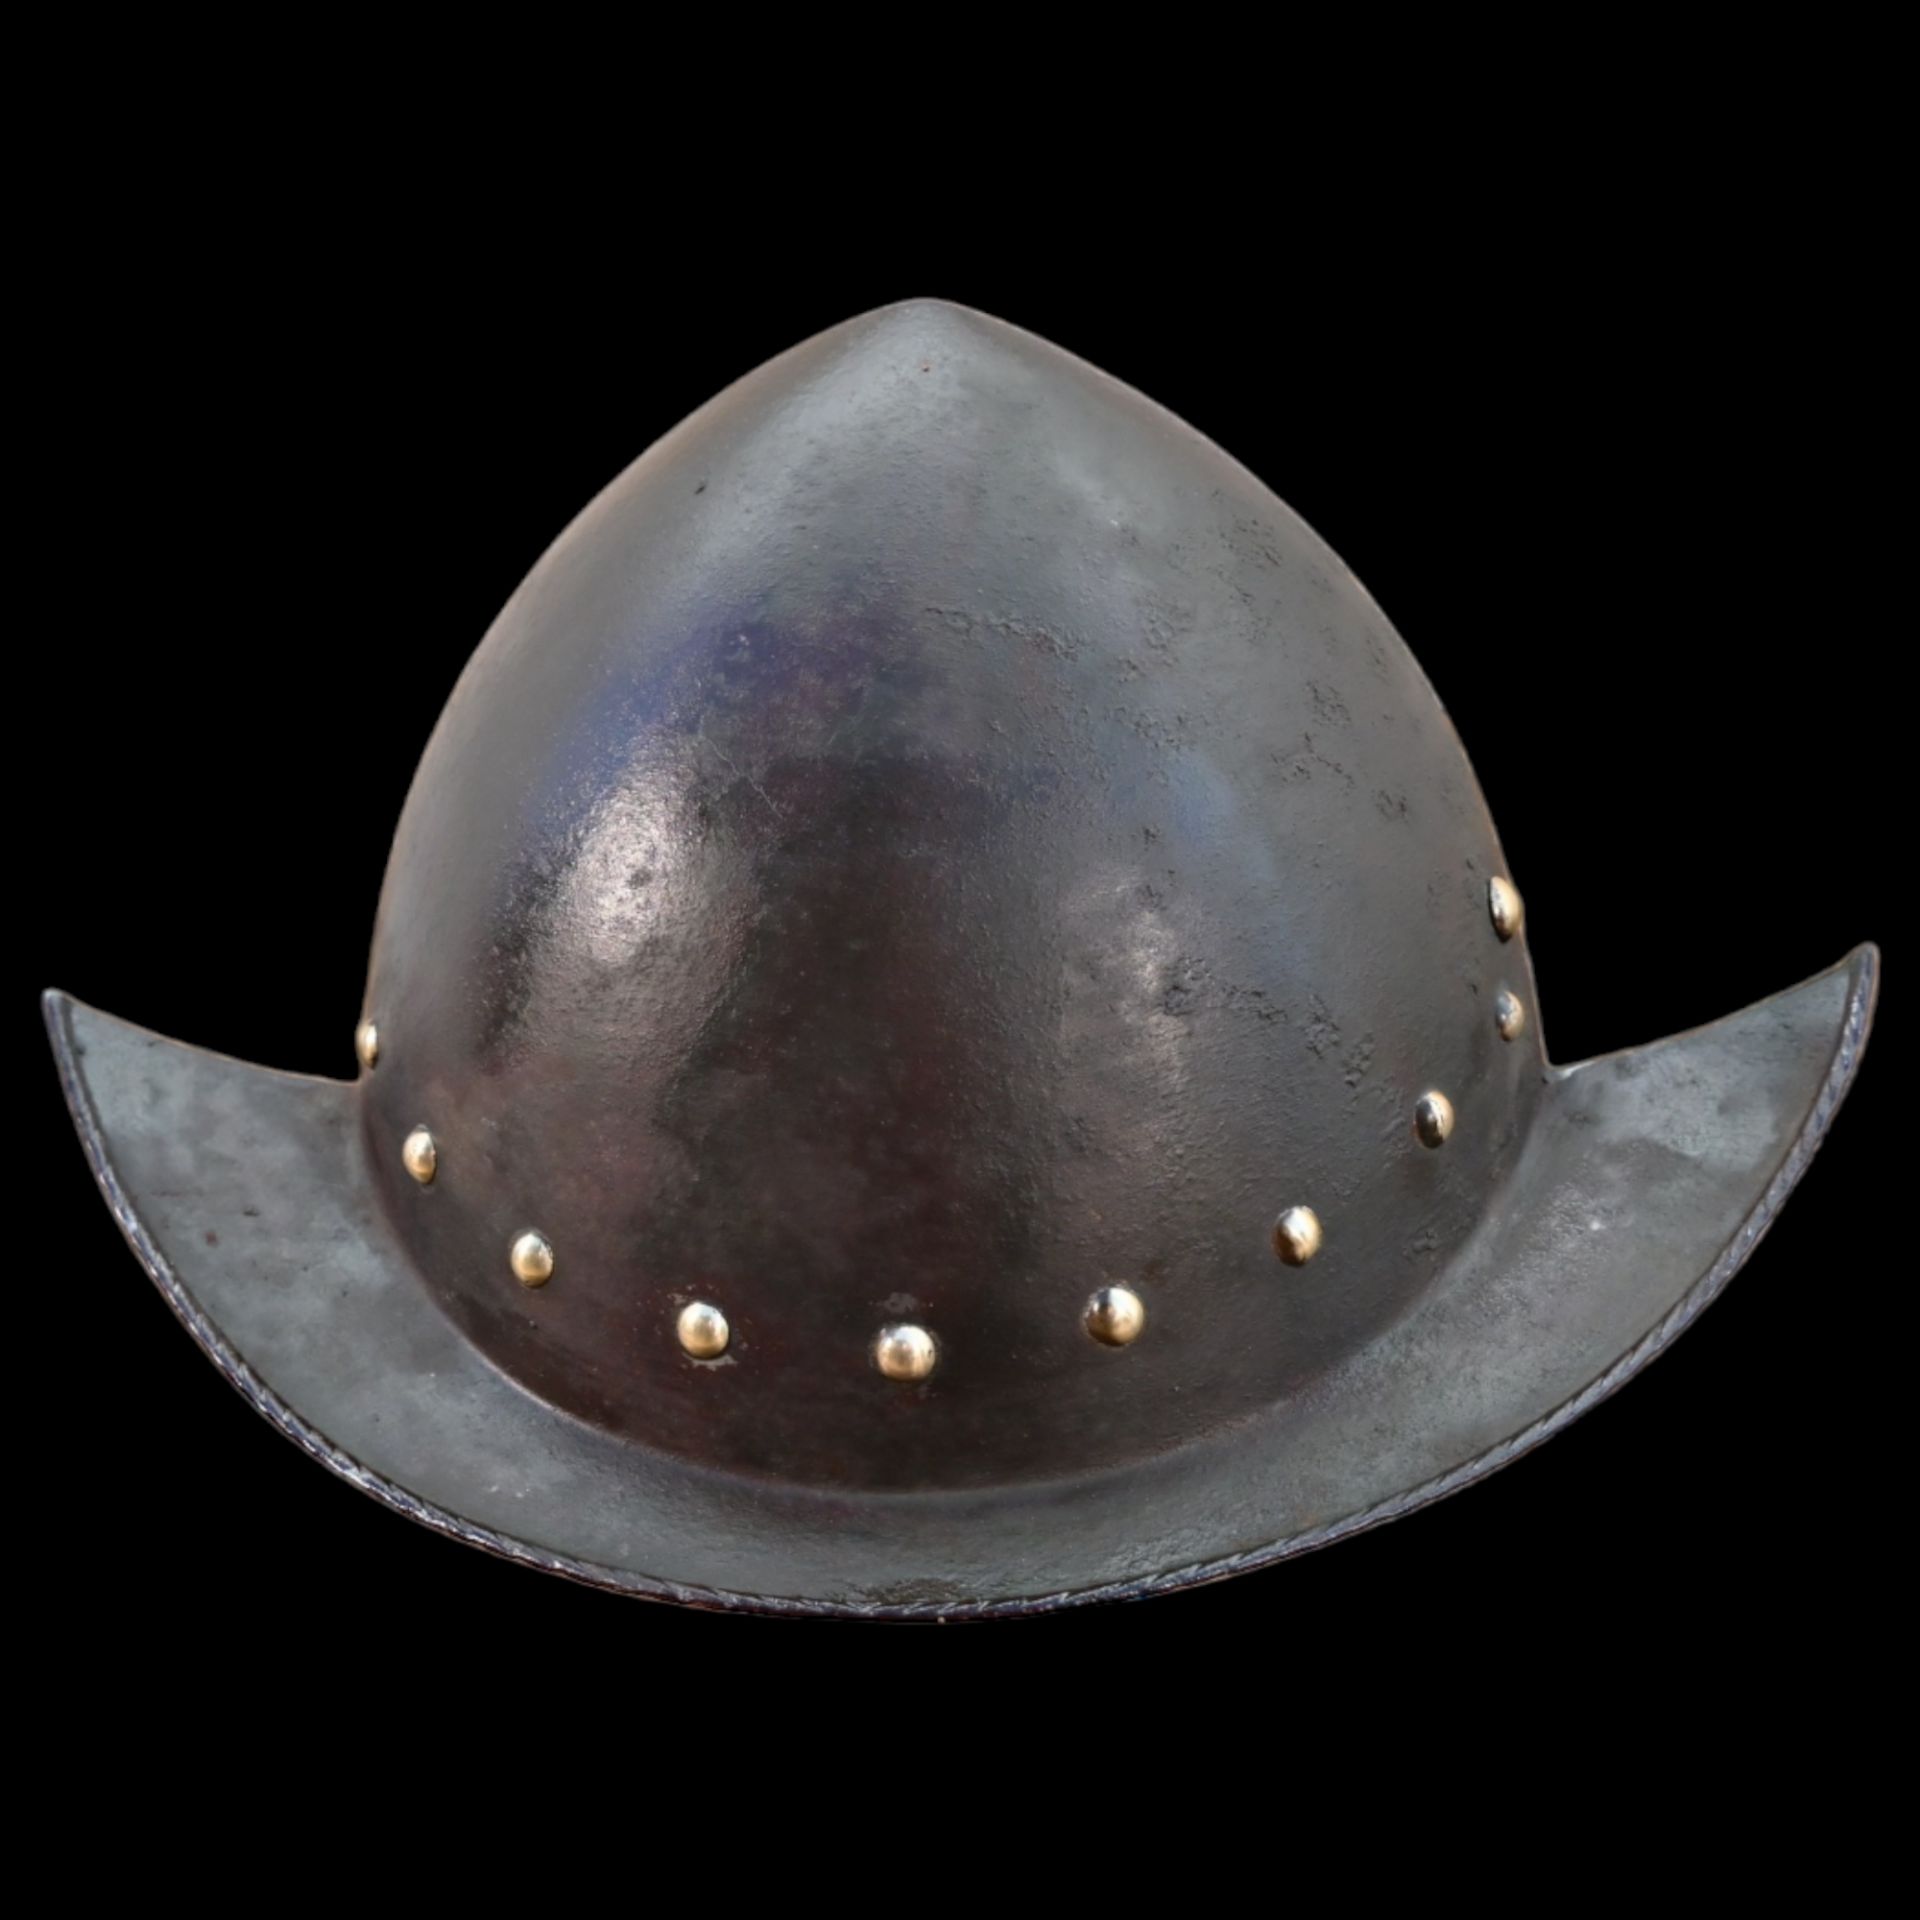 A Morion helmet in the style of the 16th century.